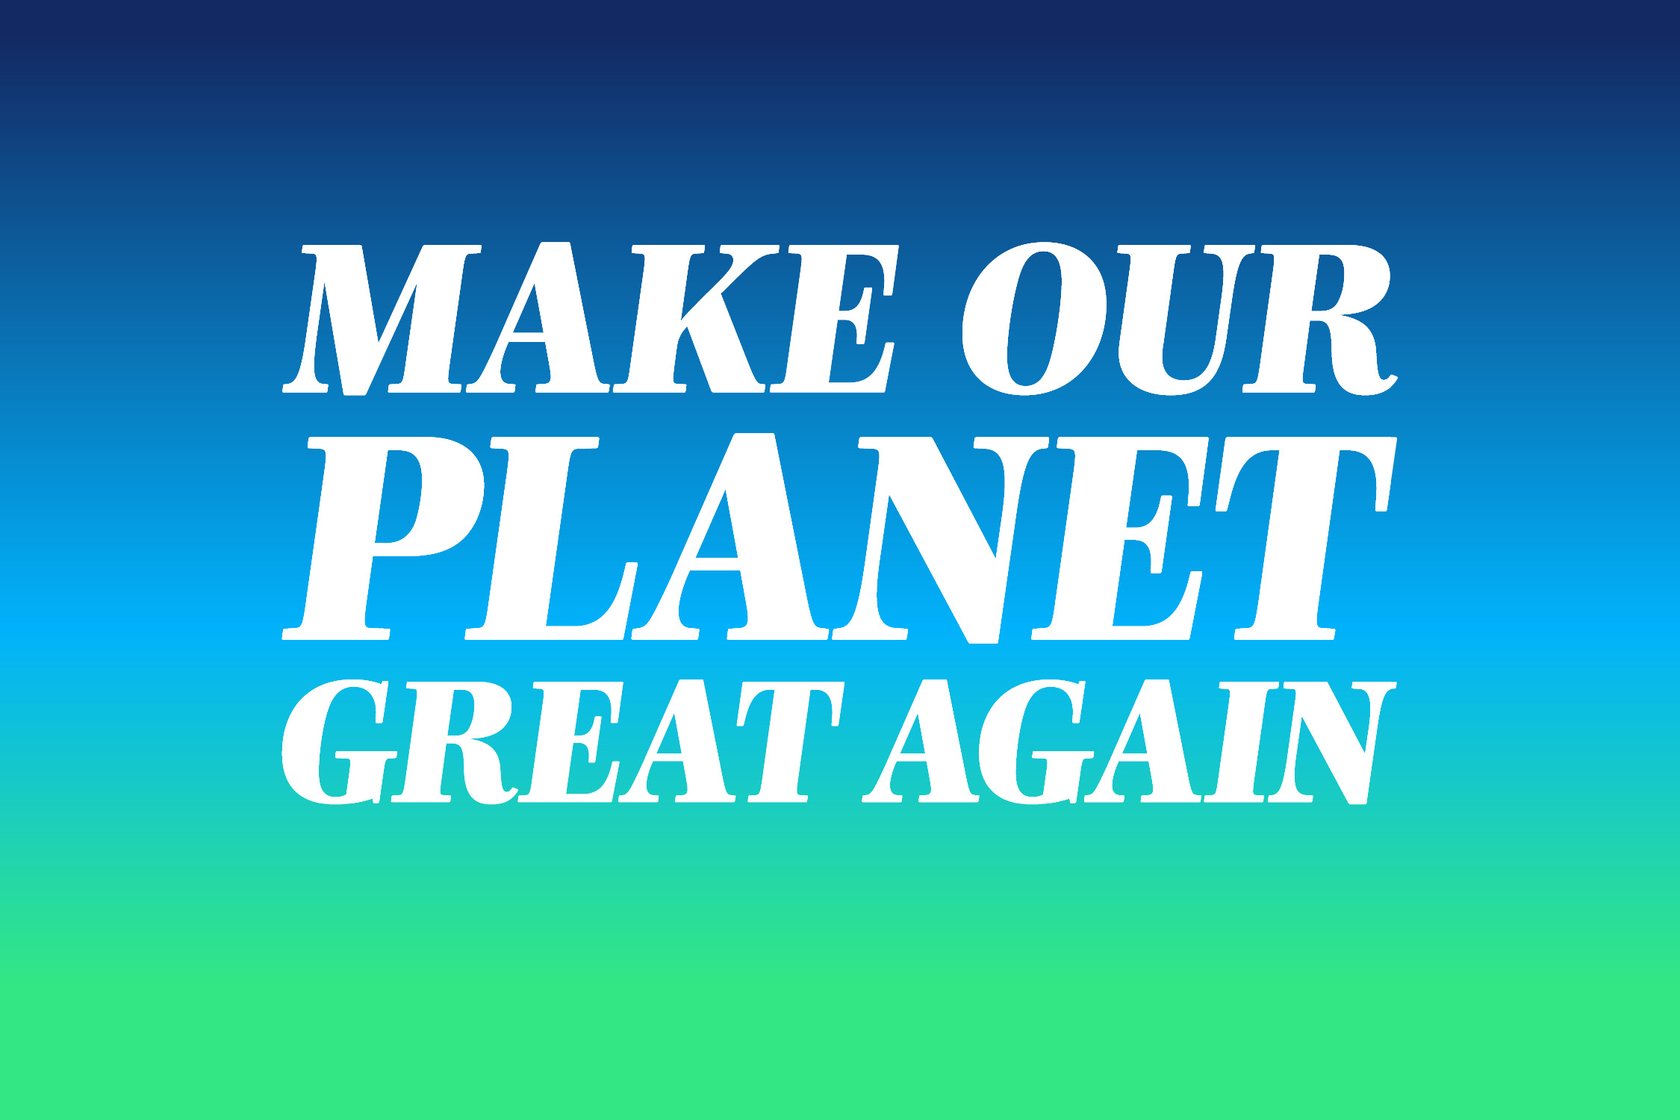 Great planet. Футболка make our Planet great again. Make WOOMEV great again. Again!.